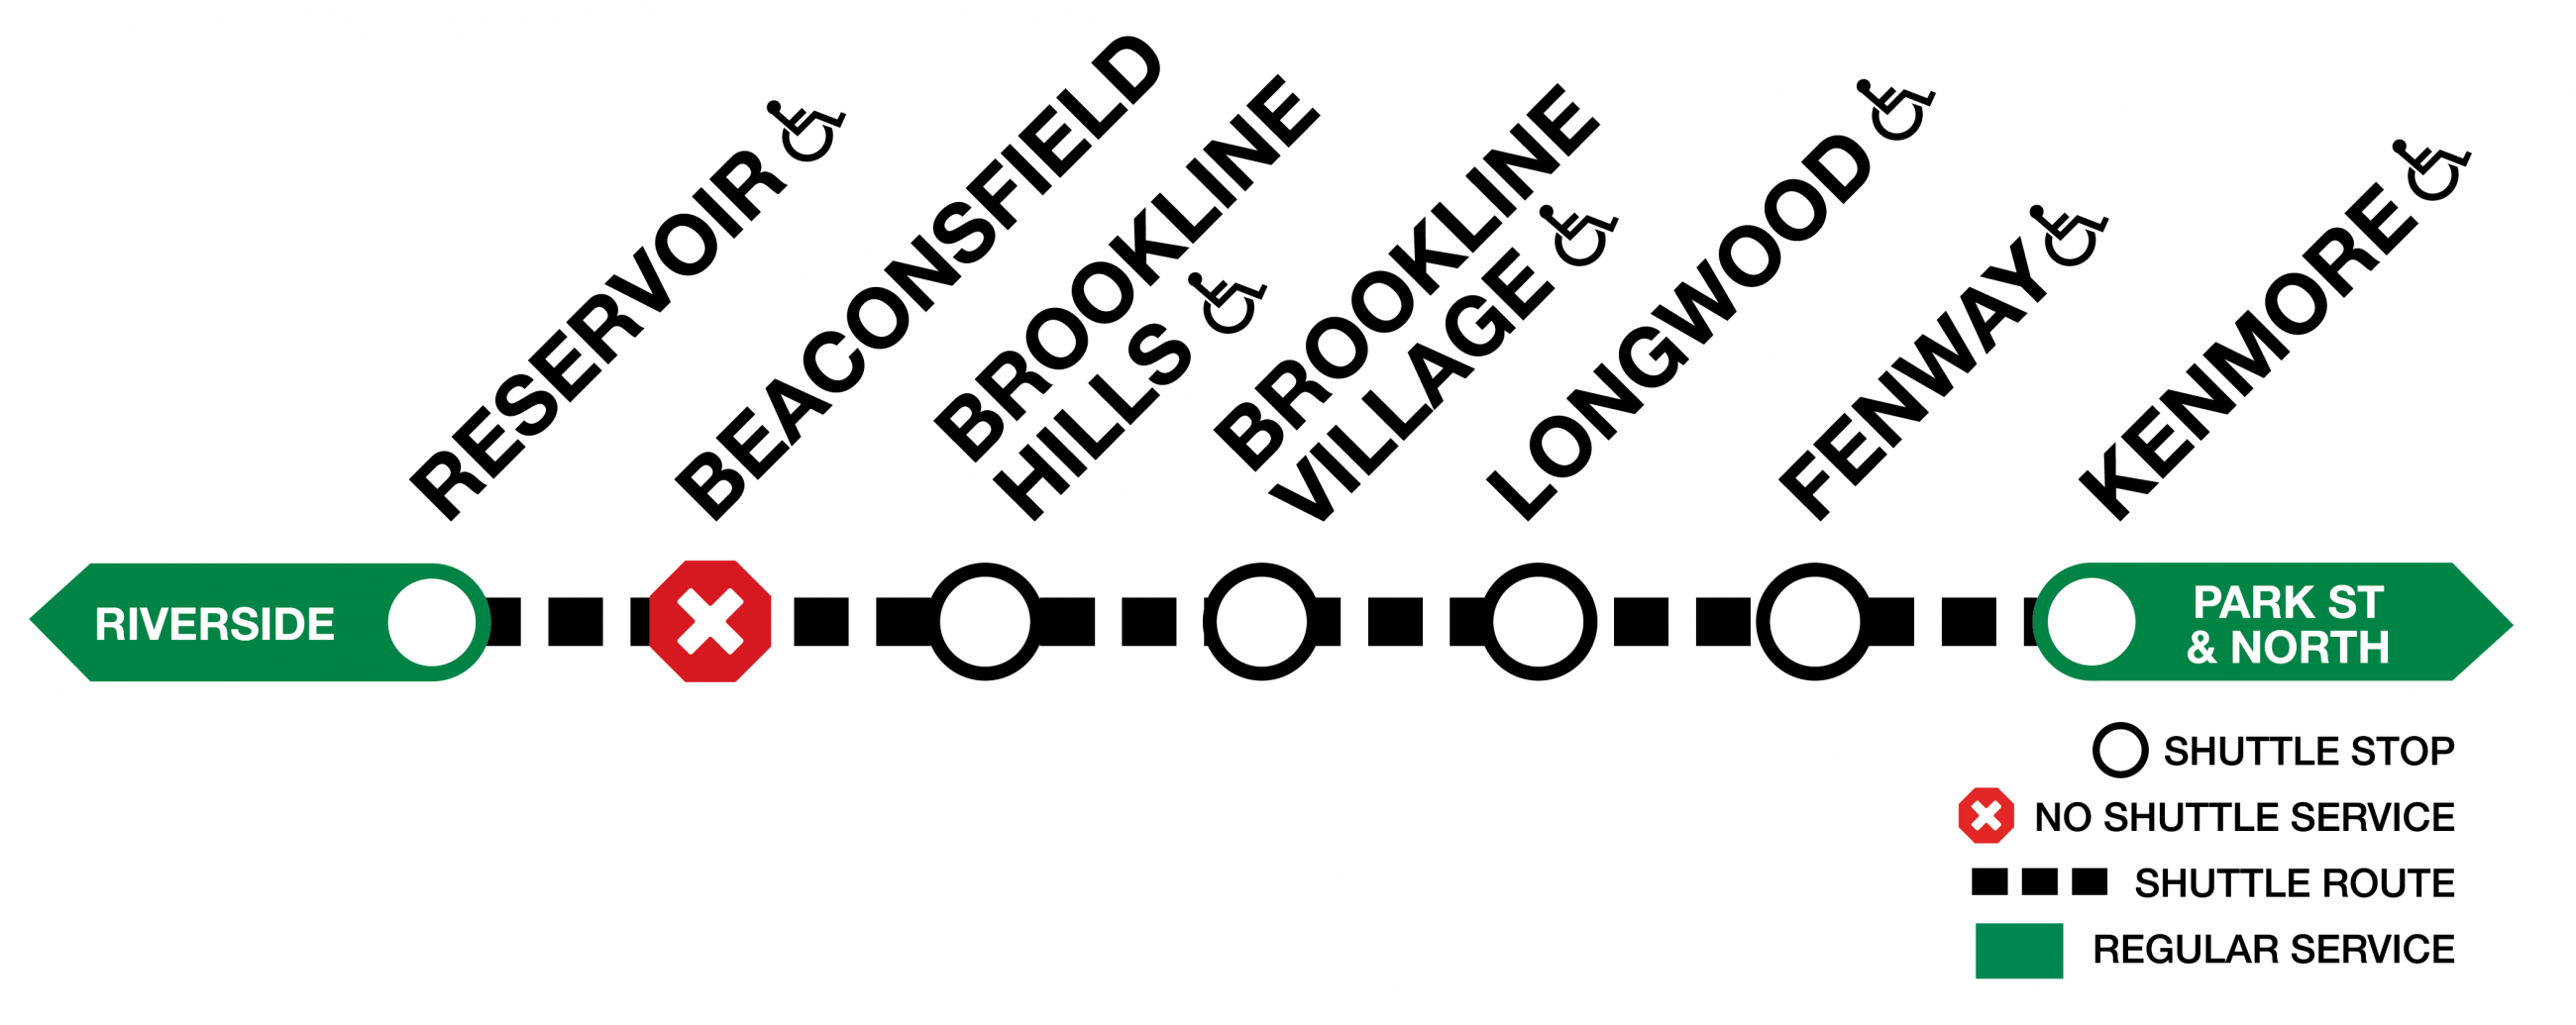 Shuttle graphic between Reservoir and Kenmore, with no service at Beaconsfield.